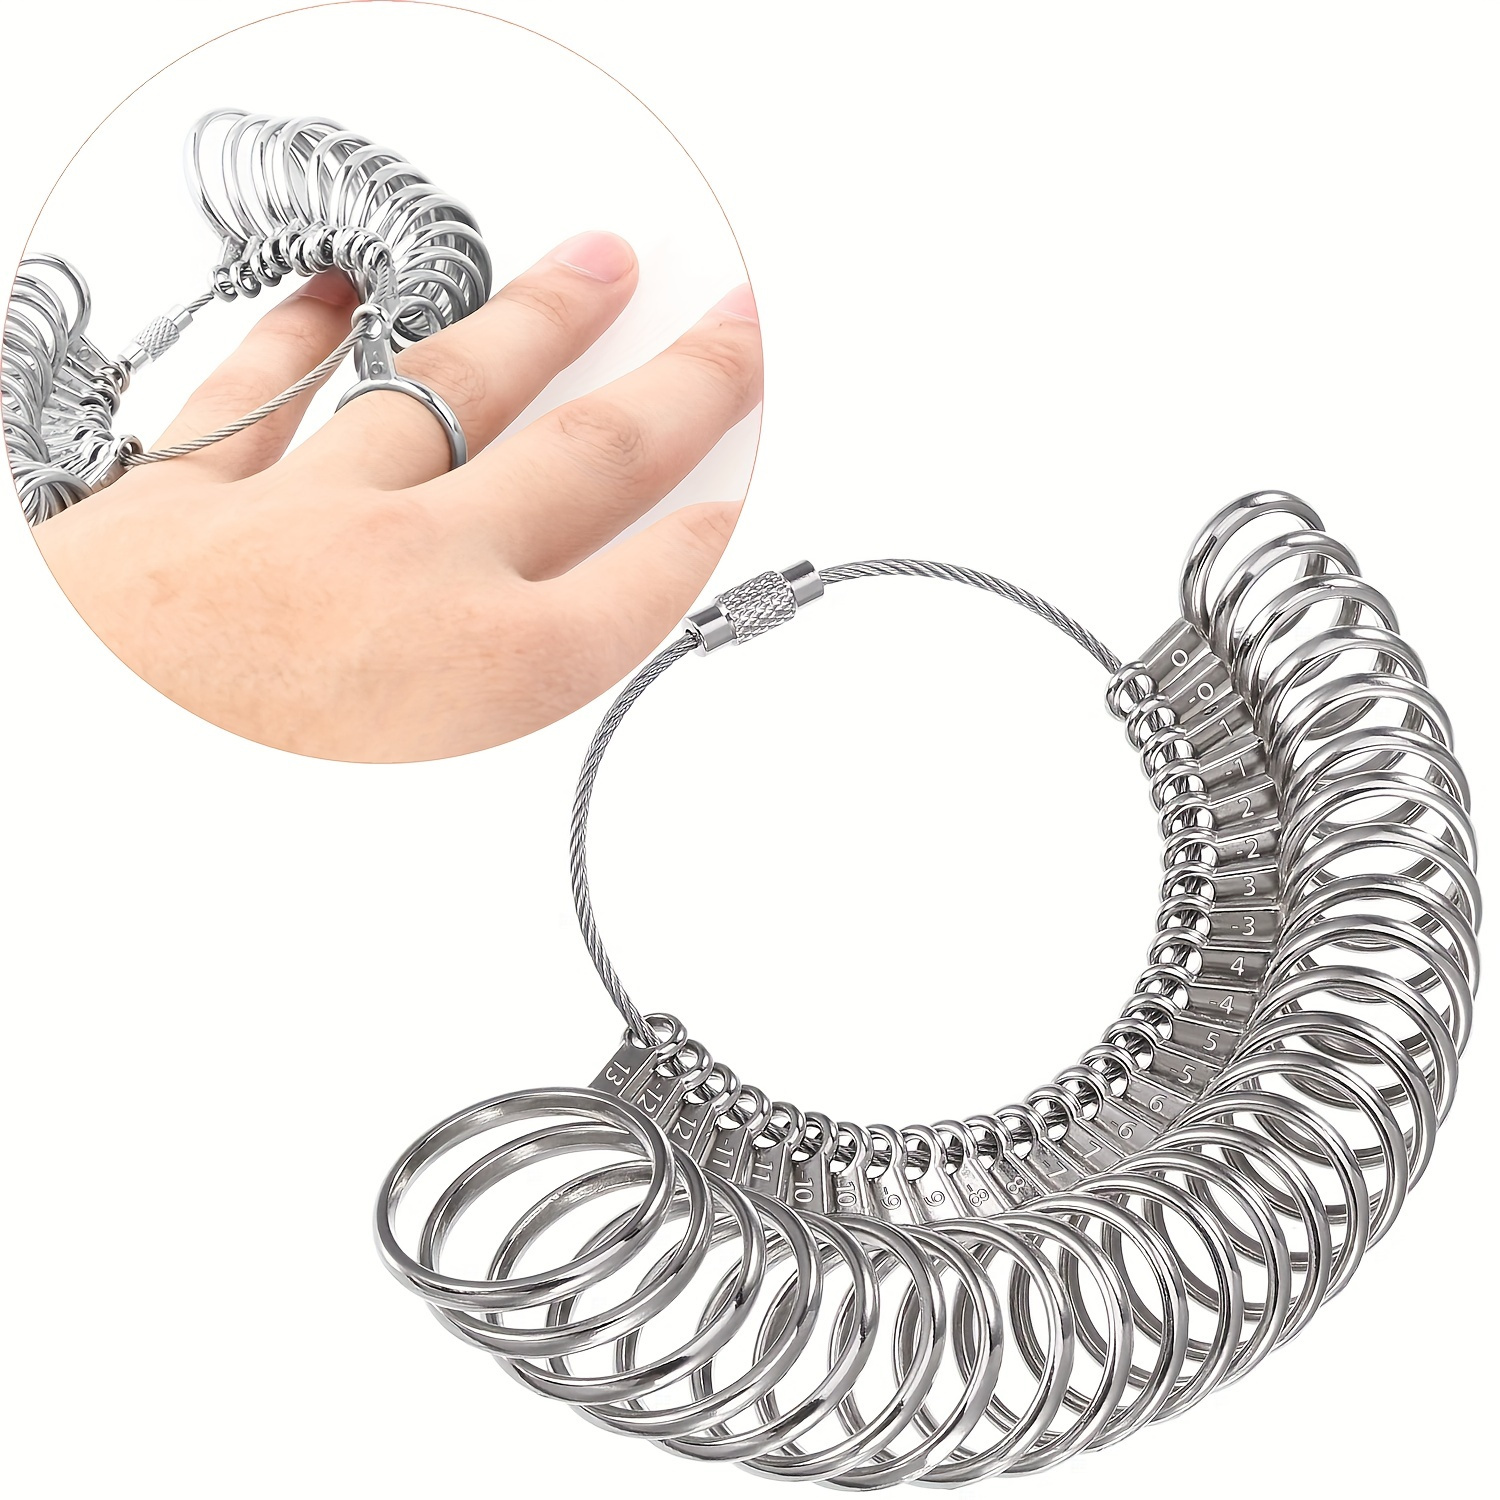 Accurately Measure Your Finger Size With This Soft Ring - Temu